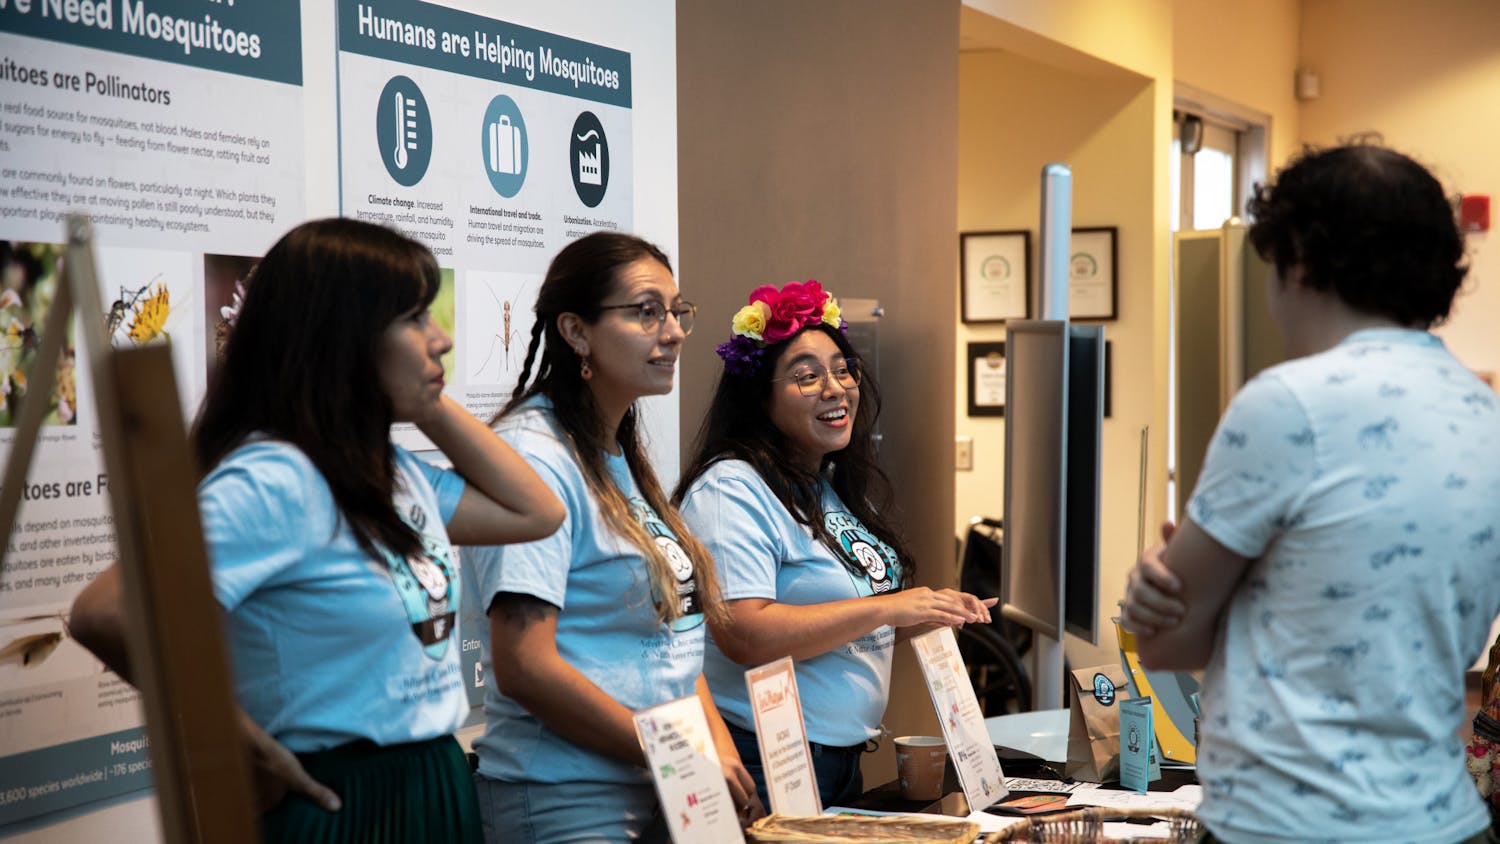 The Society for the Advancement of Chicanos/Hispanics and Native Americans in Science tables and talks to visitors at the Florida Museum of Natural History Sunday, Oct. 2, 2022.